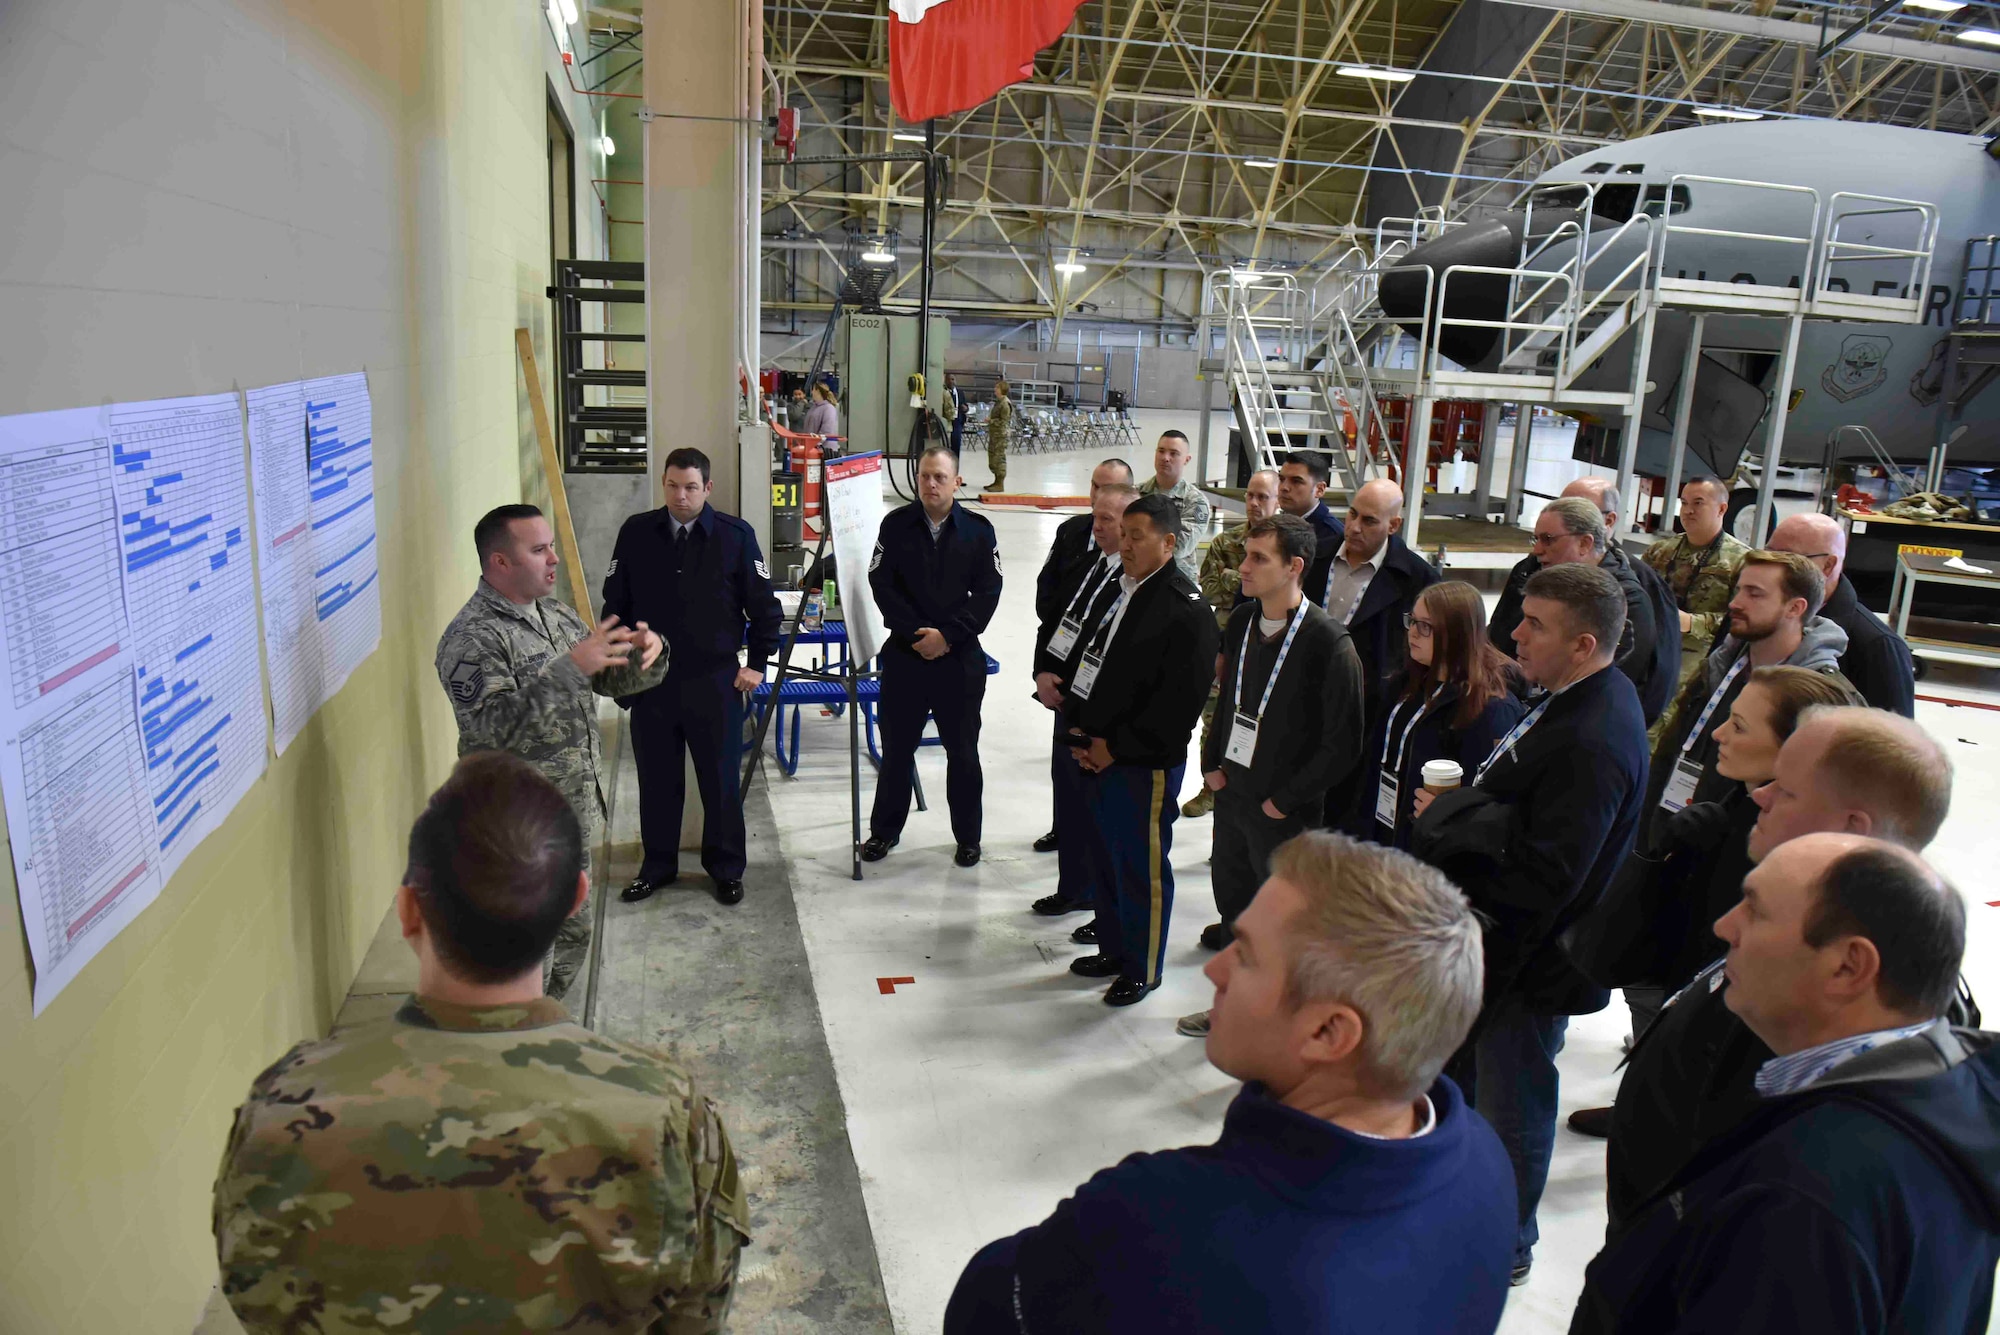 U.S. Air Force Master Sgt. Derrick Brooke, 92nd Maintenance Squadron periodic inspection chief, explains to members from the Department of Defense Maintenance Symposium how Team Fairchild implemented Theory of Constraints at Fairchild Air Force Base, Washington, Dec 12, 2019. TOC is a management process that enables Airmen to work efficiently and quickly, cutting time spent on inspections and costs. (U.S. Air Force photo by Airman 1st Class Kiaundra Miller)